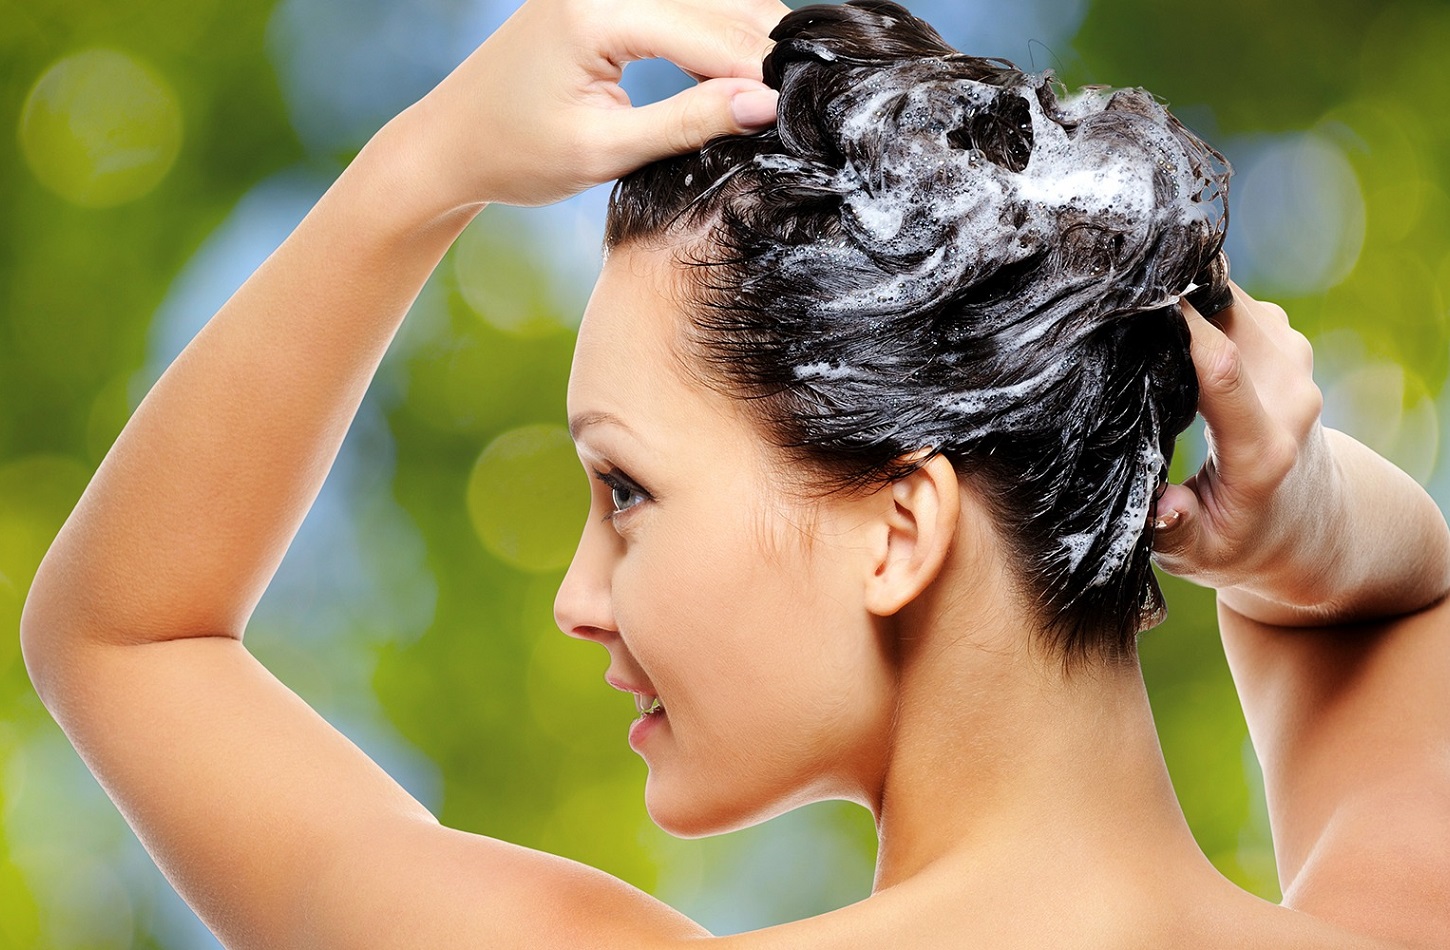 Shampoos Without Harmful Chemicals Reviews